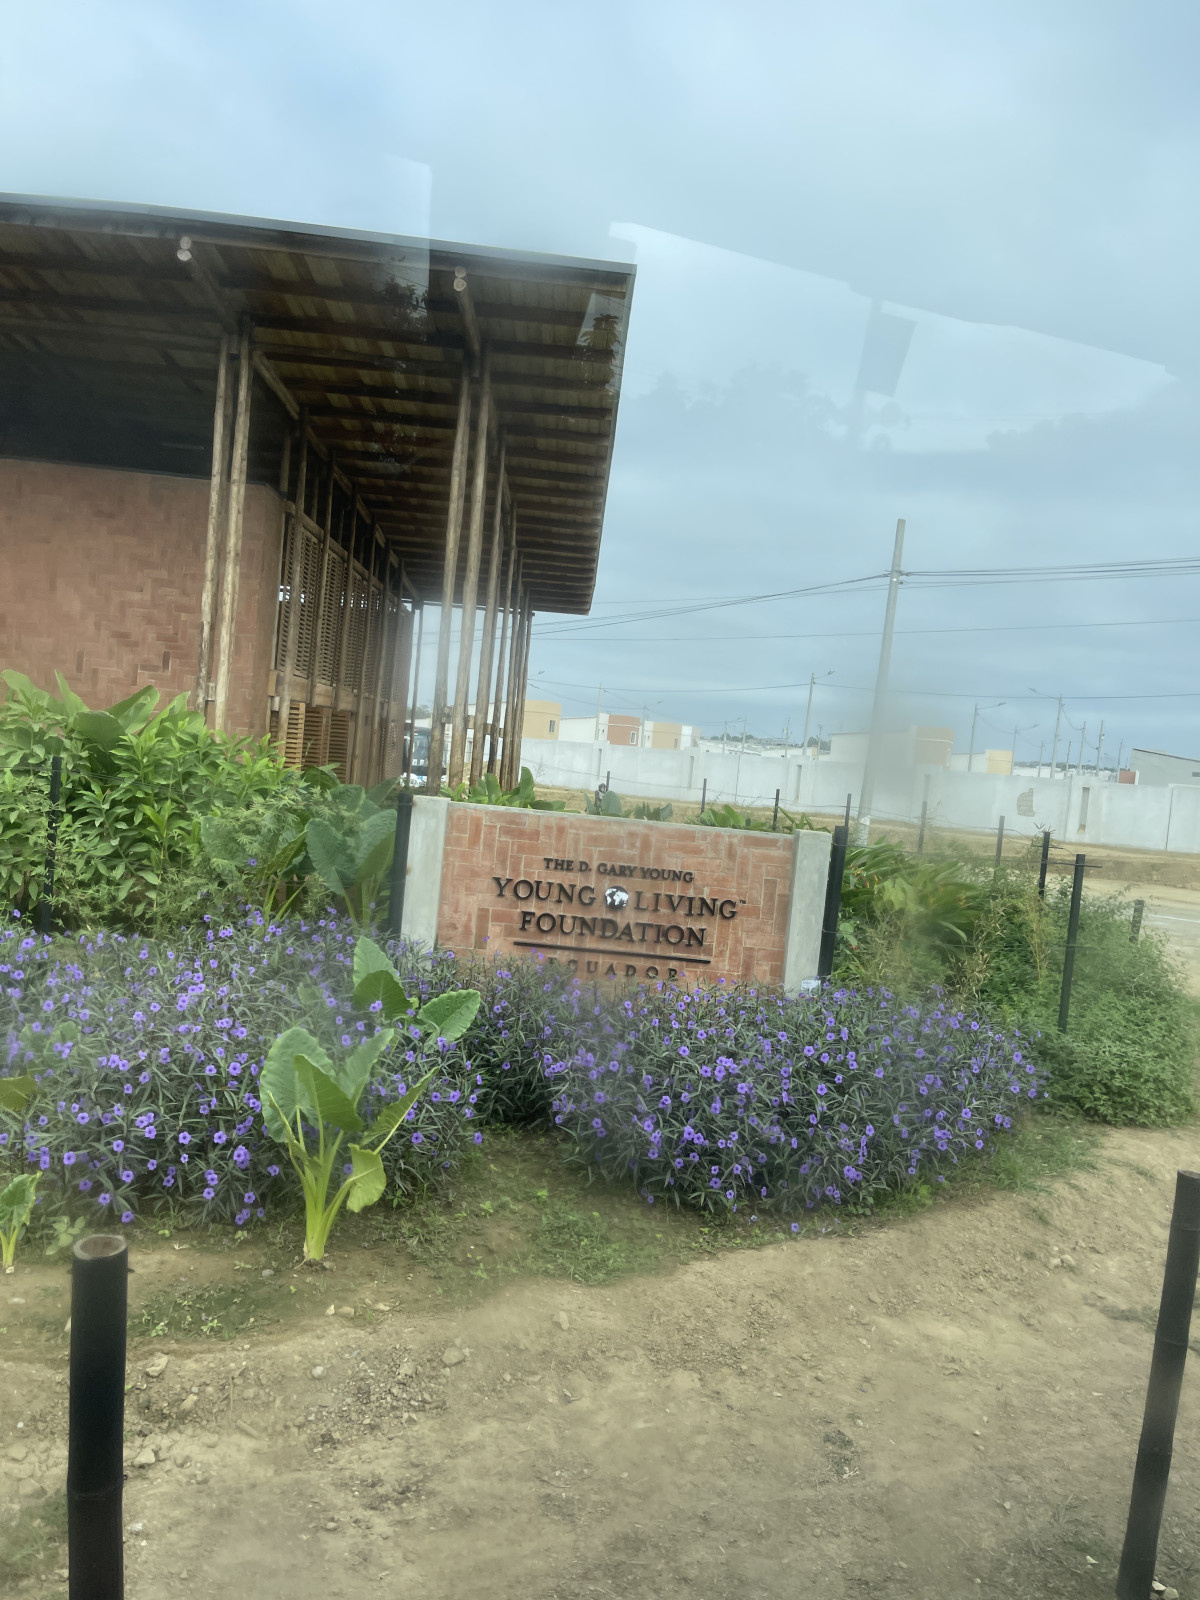 From Farm to Community - Young Living's Impact in Ecuador's Community Centre